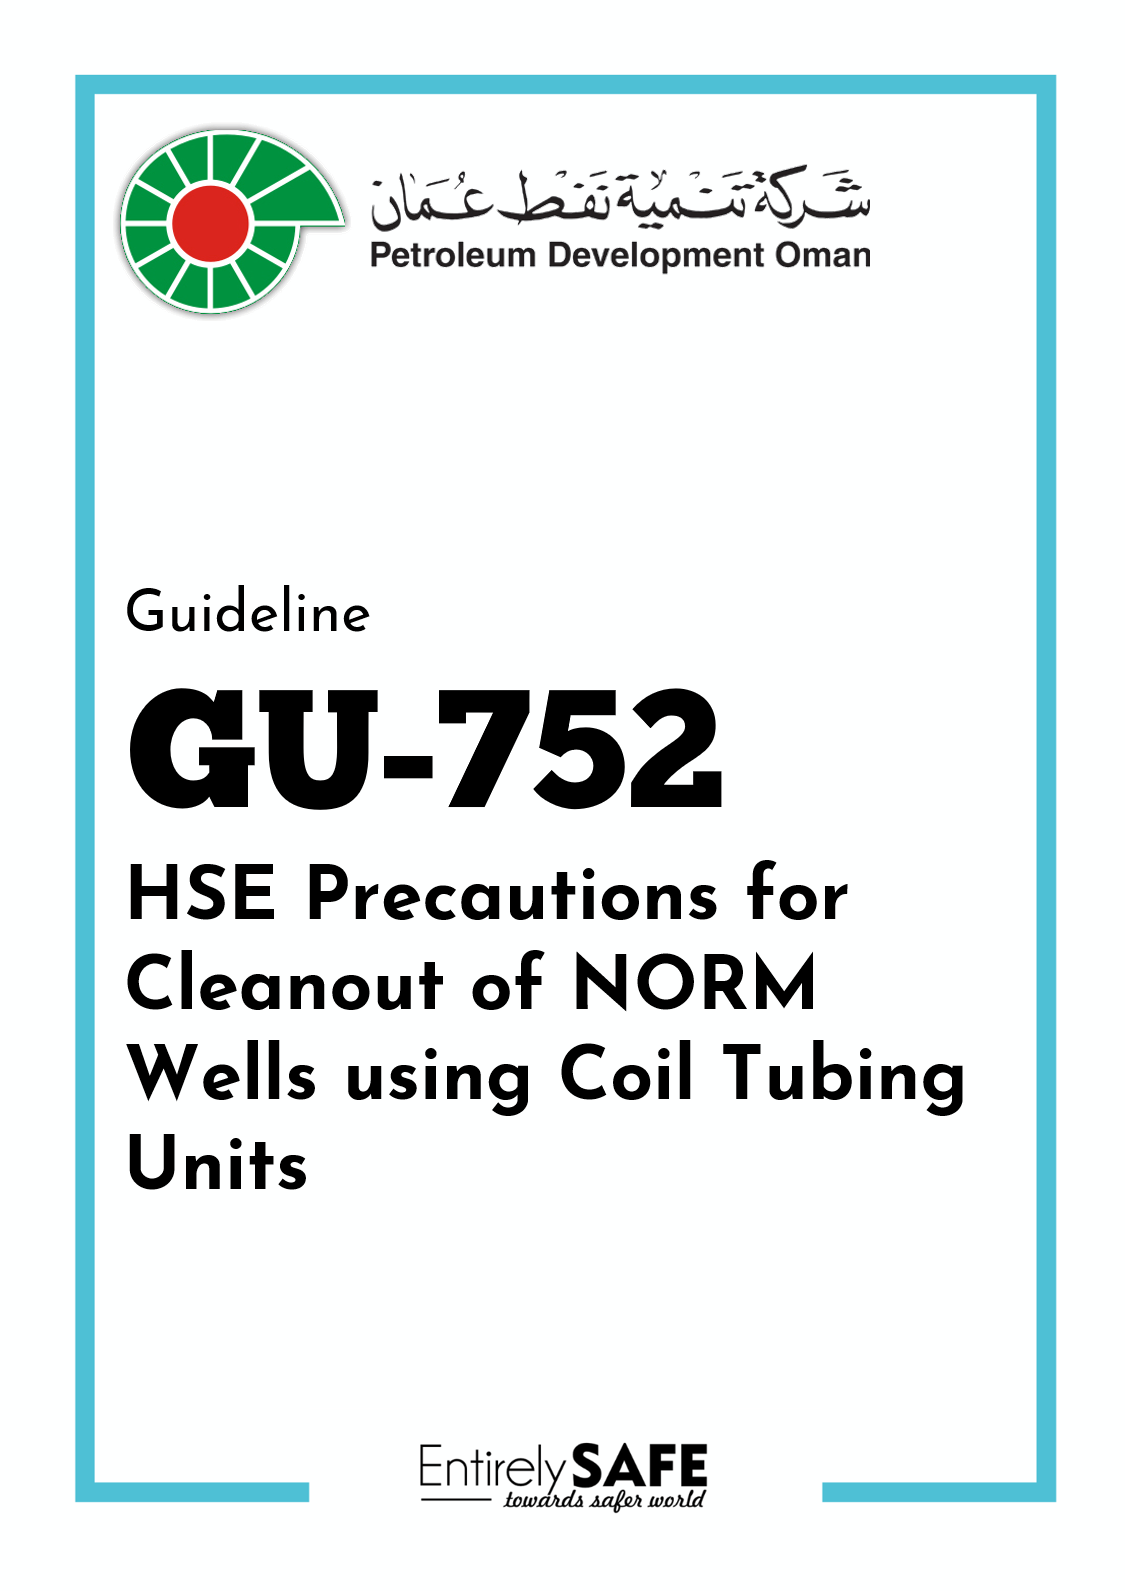 GU-752-HSE-Precautions-for-Cleanout-of-NORM-Wells-using-Coil-Tubing-Units-PDO-download